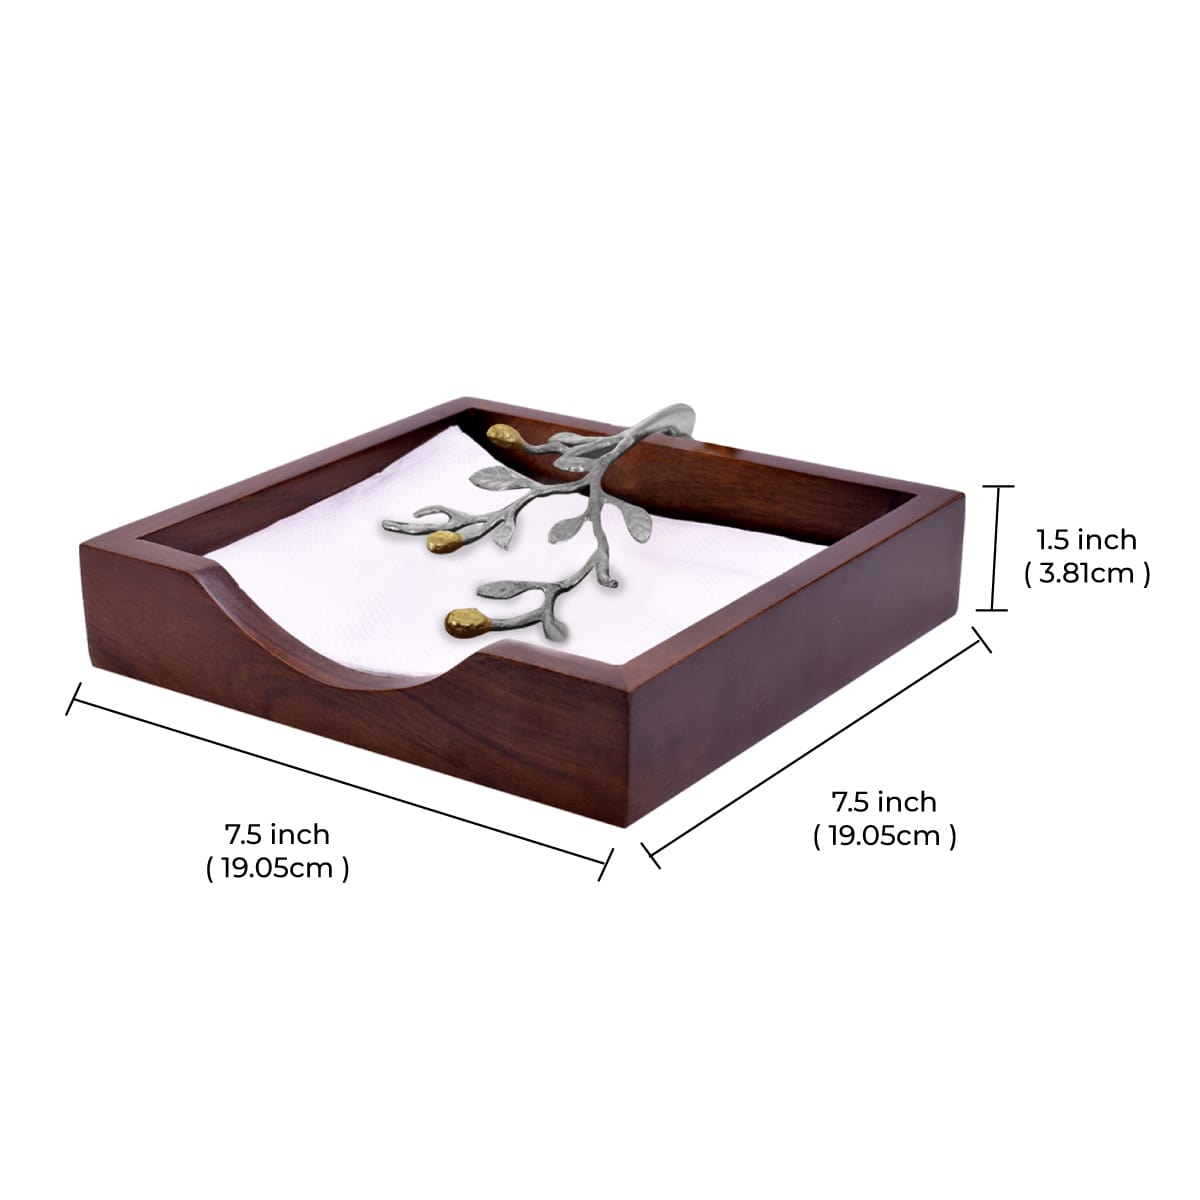 Solid Wood Napkin Holder with Silver and Gold Finish Ornament - Decozen